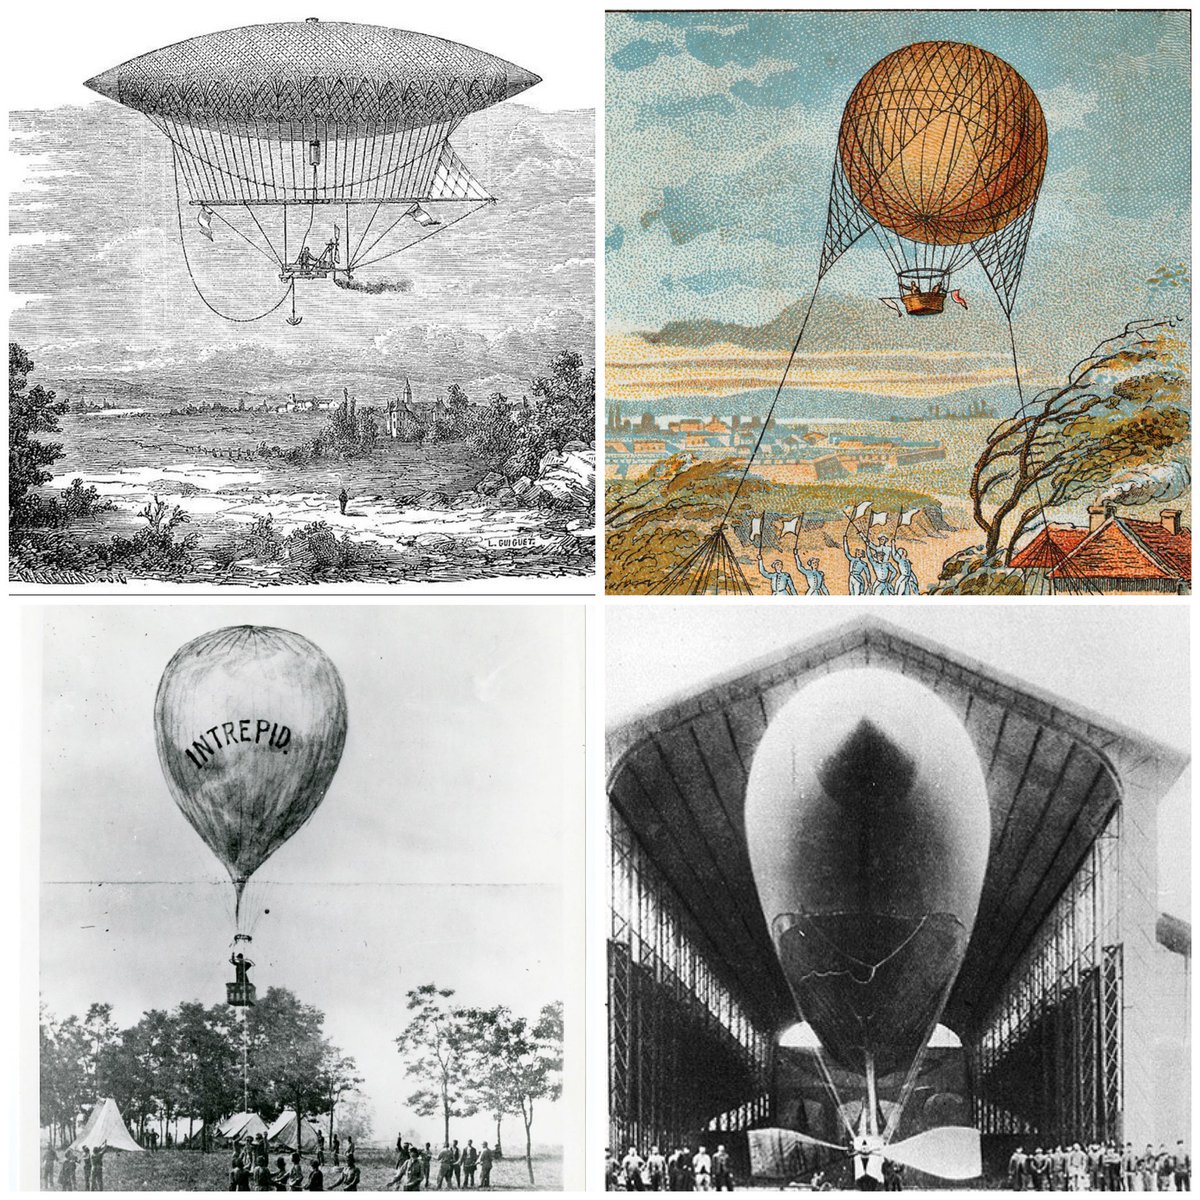 🚨🚨Episode 3 - Taking to the Skies is out now!! 🚨🚨 On this episode we look at the history of military ballooning from the French Revolution to WW1. We also look at the first powered flight and attempts to build an airship that could actually be steered. Links below 👇🏻